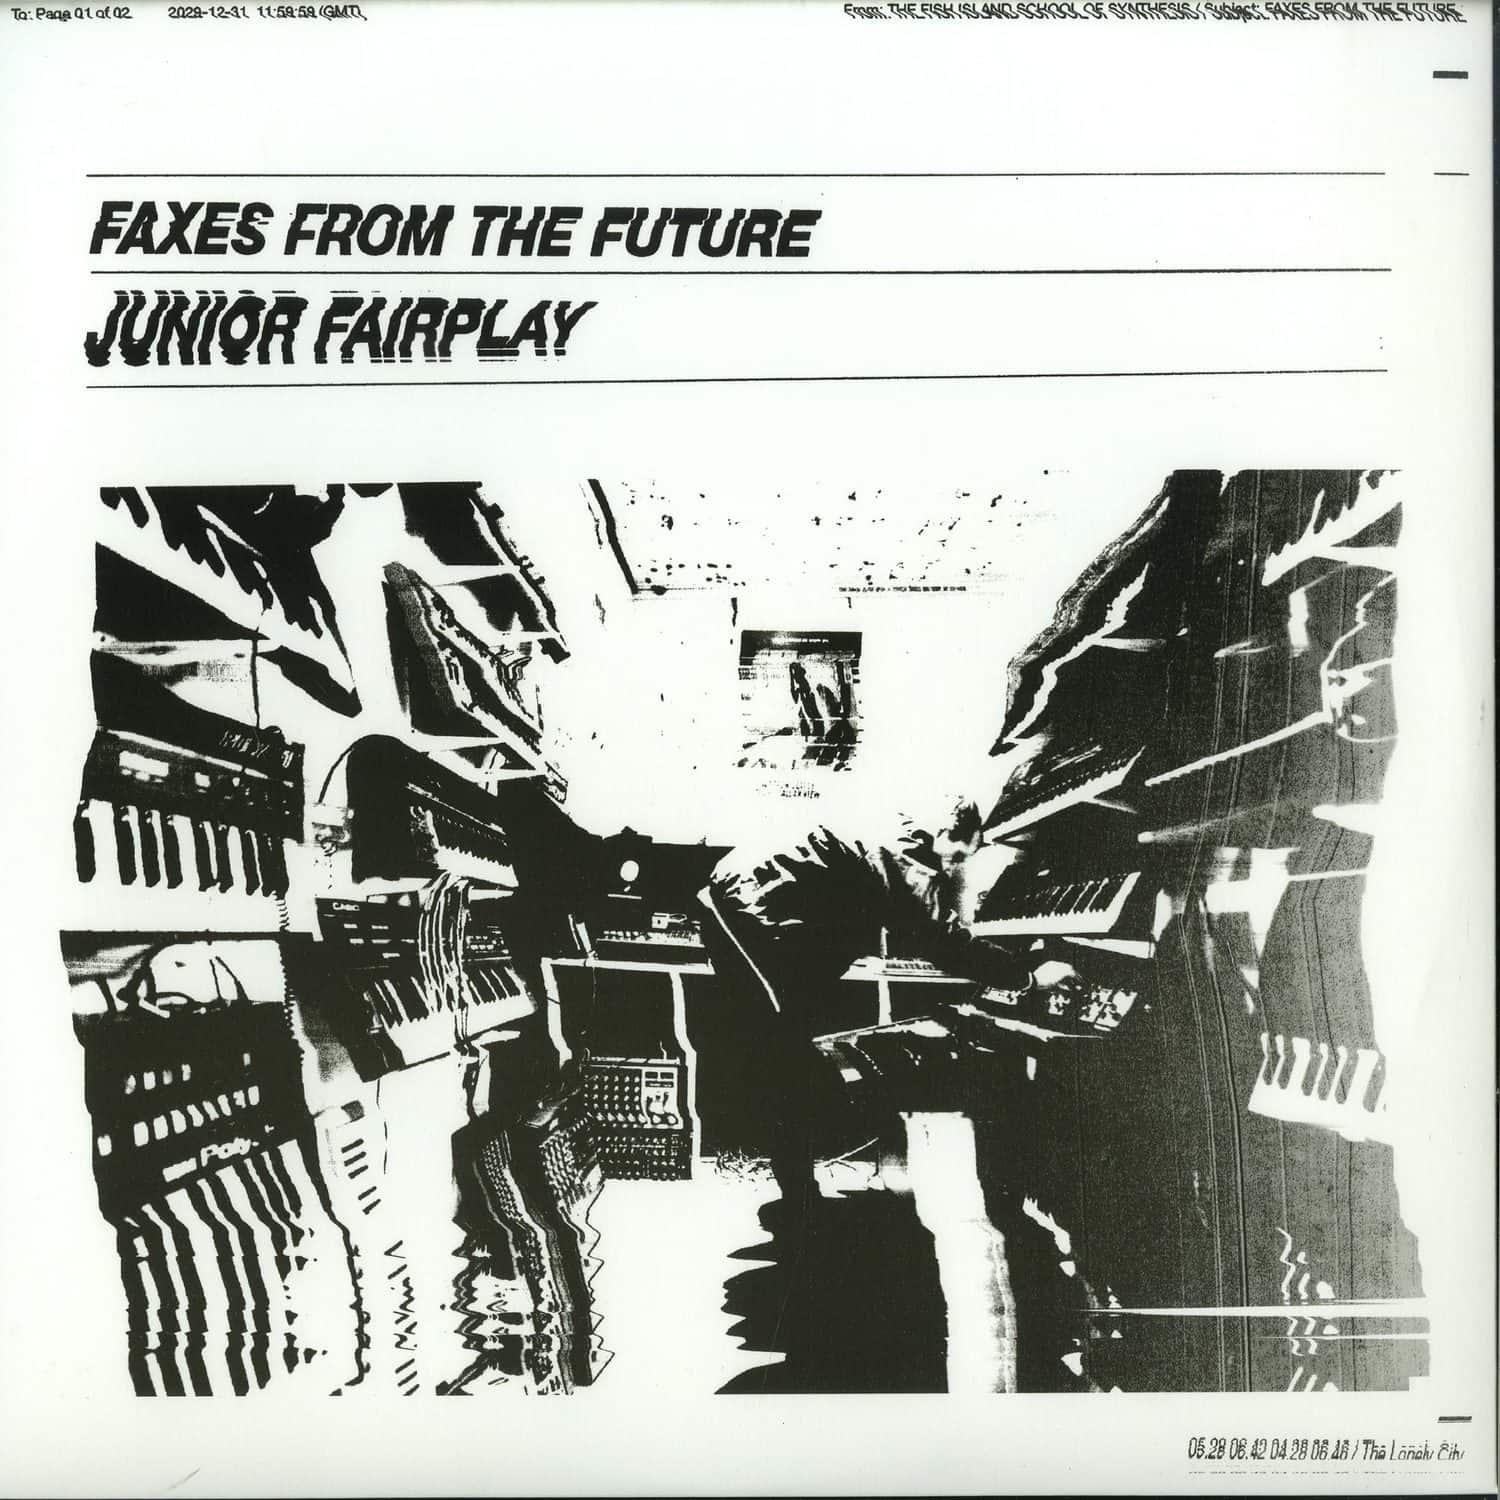 Junior Fairplay - FAXES FROM THE FUTURE